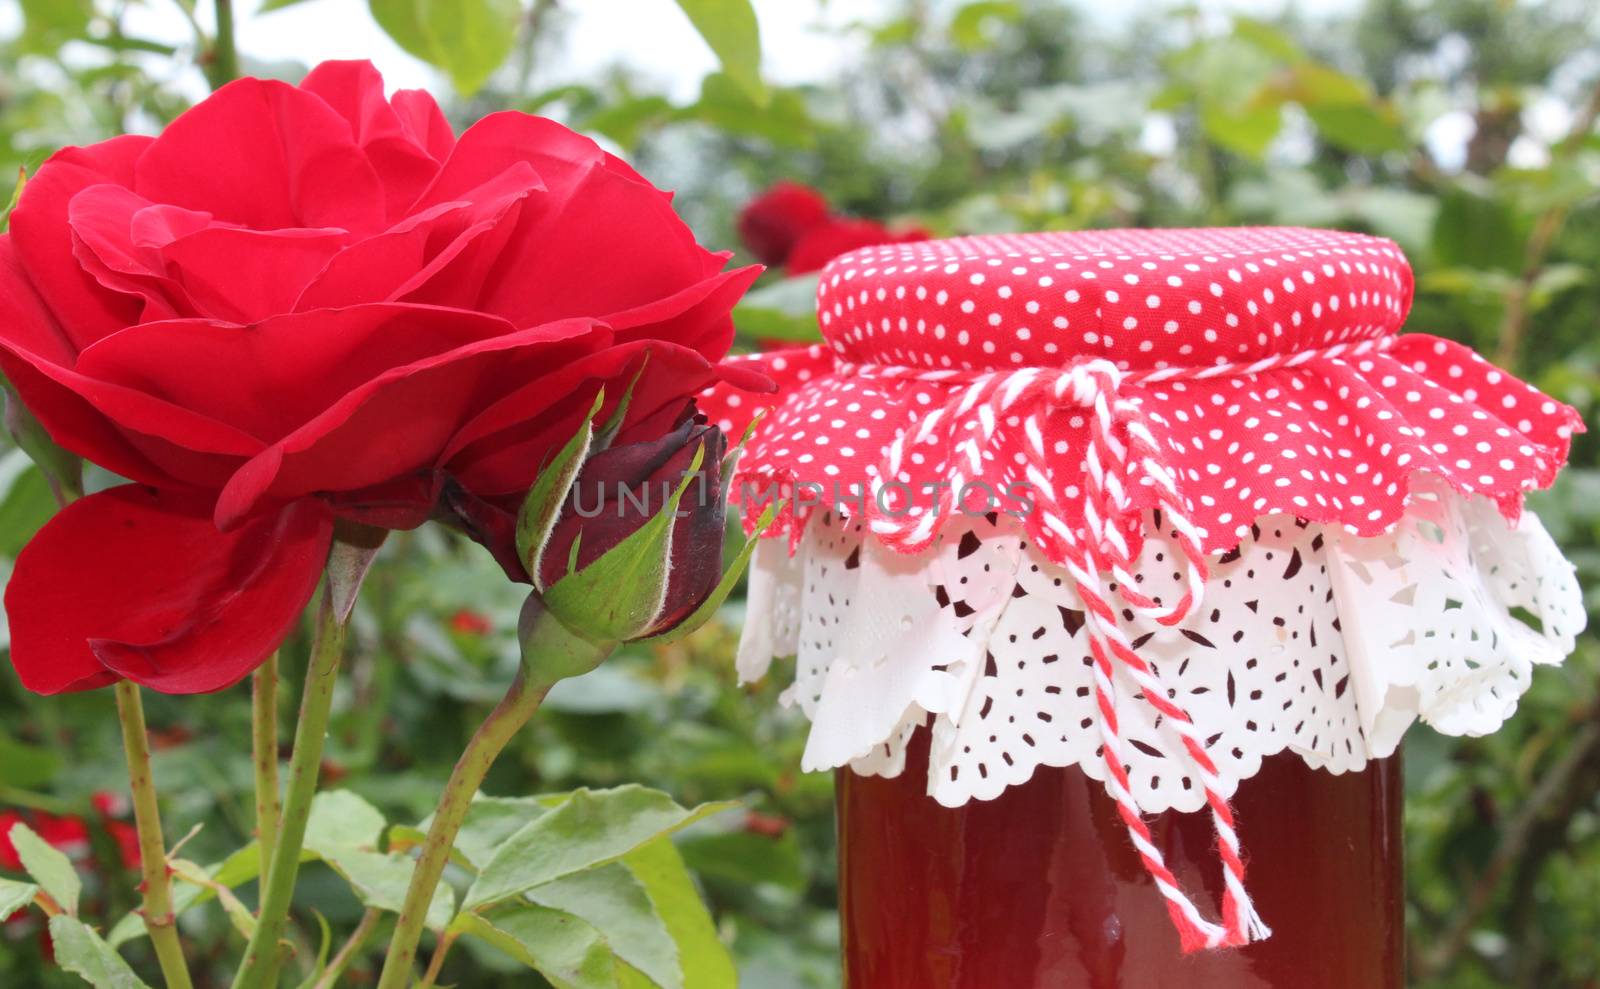 The picture shows rose jelly and blossoming roses